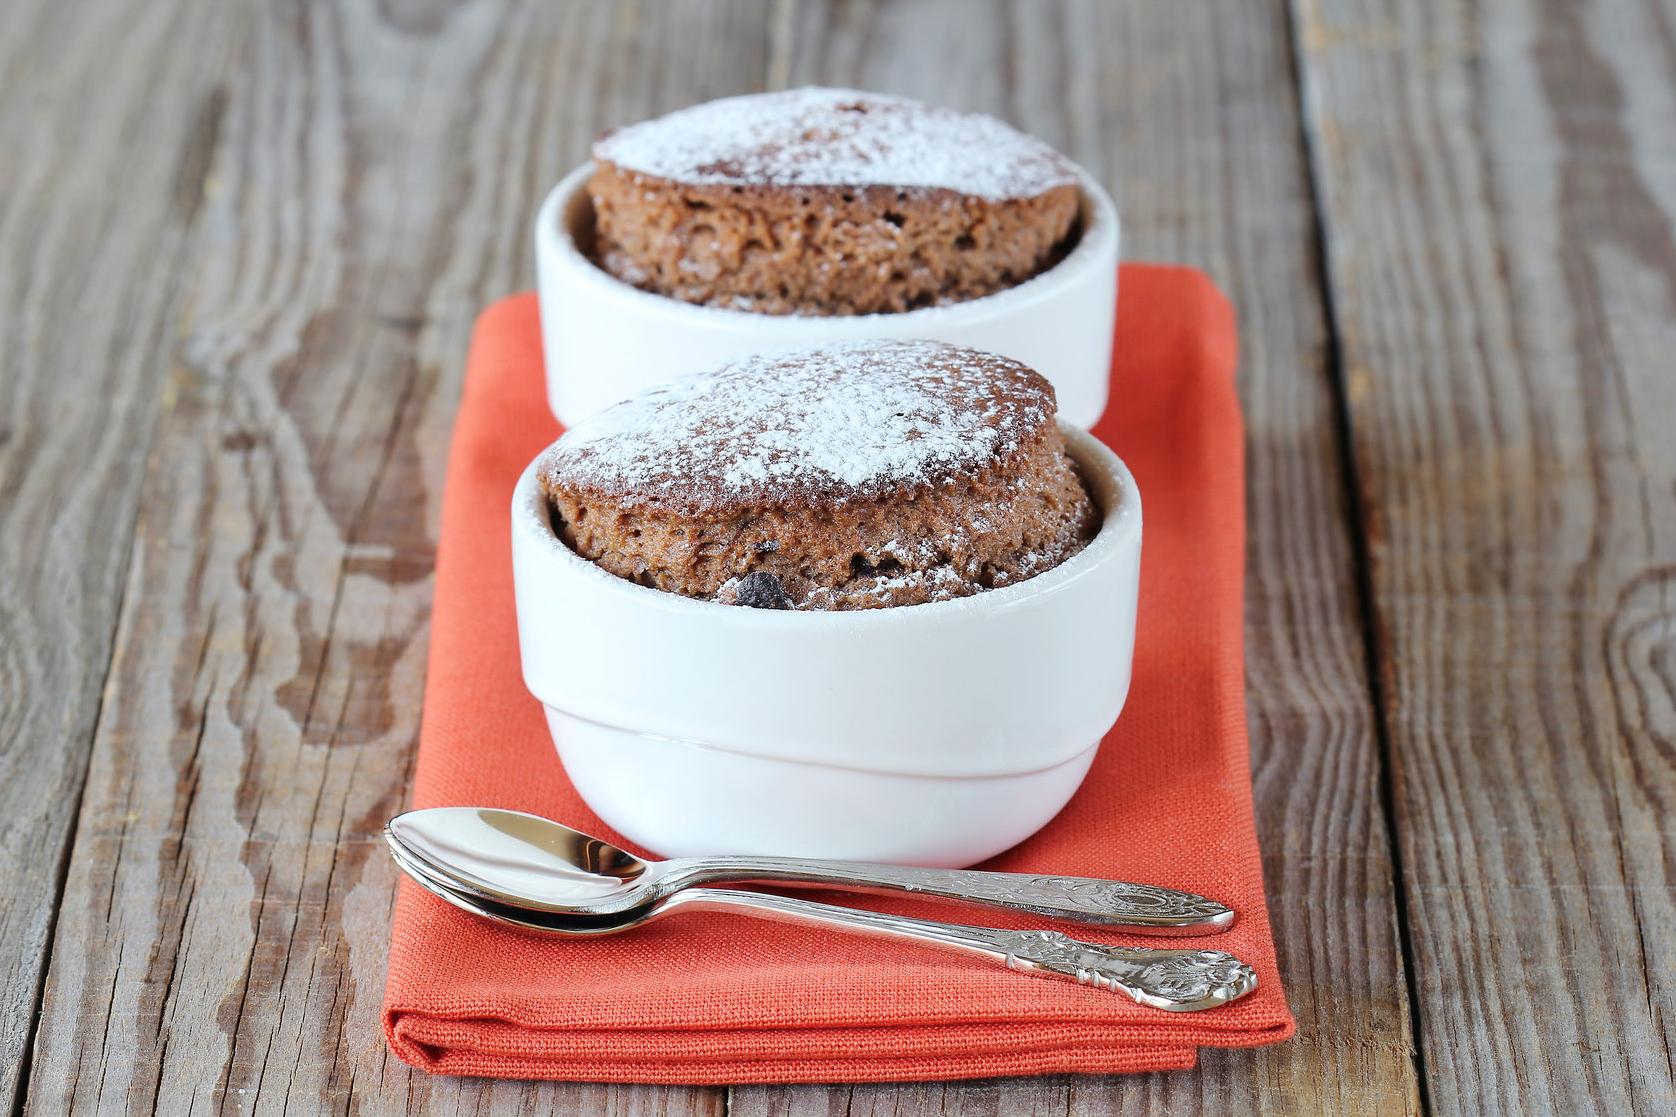  Can you resist the temptation of this delicious coffee souffle?